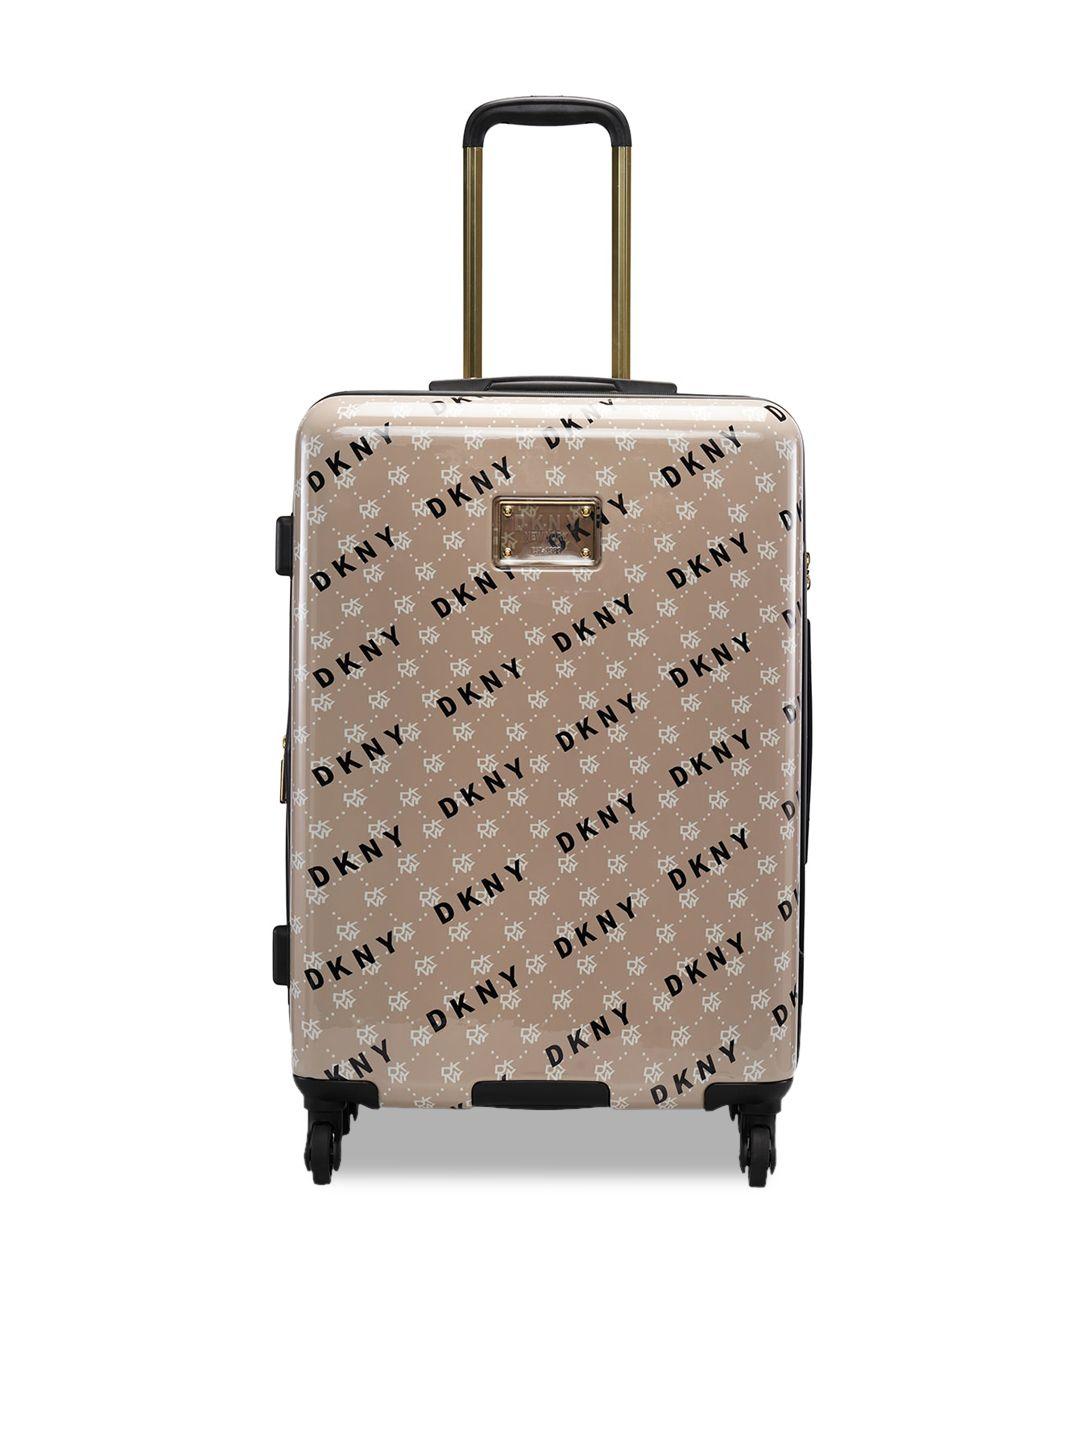 dkny printed abs material hard-sided large trolley suitcase